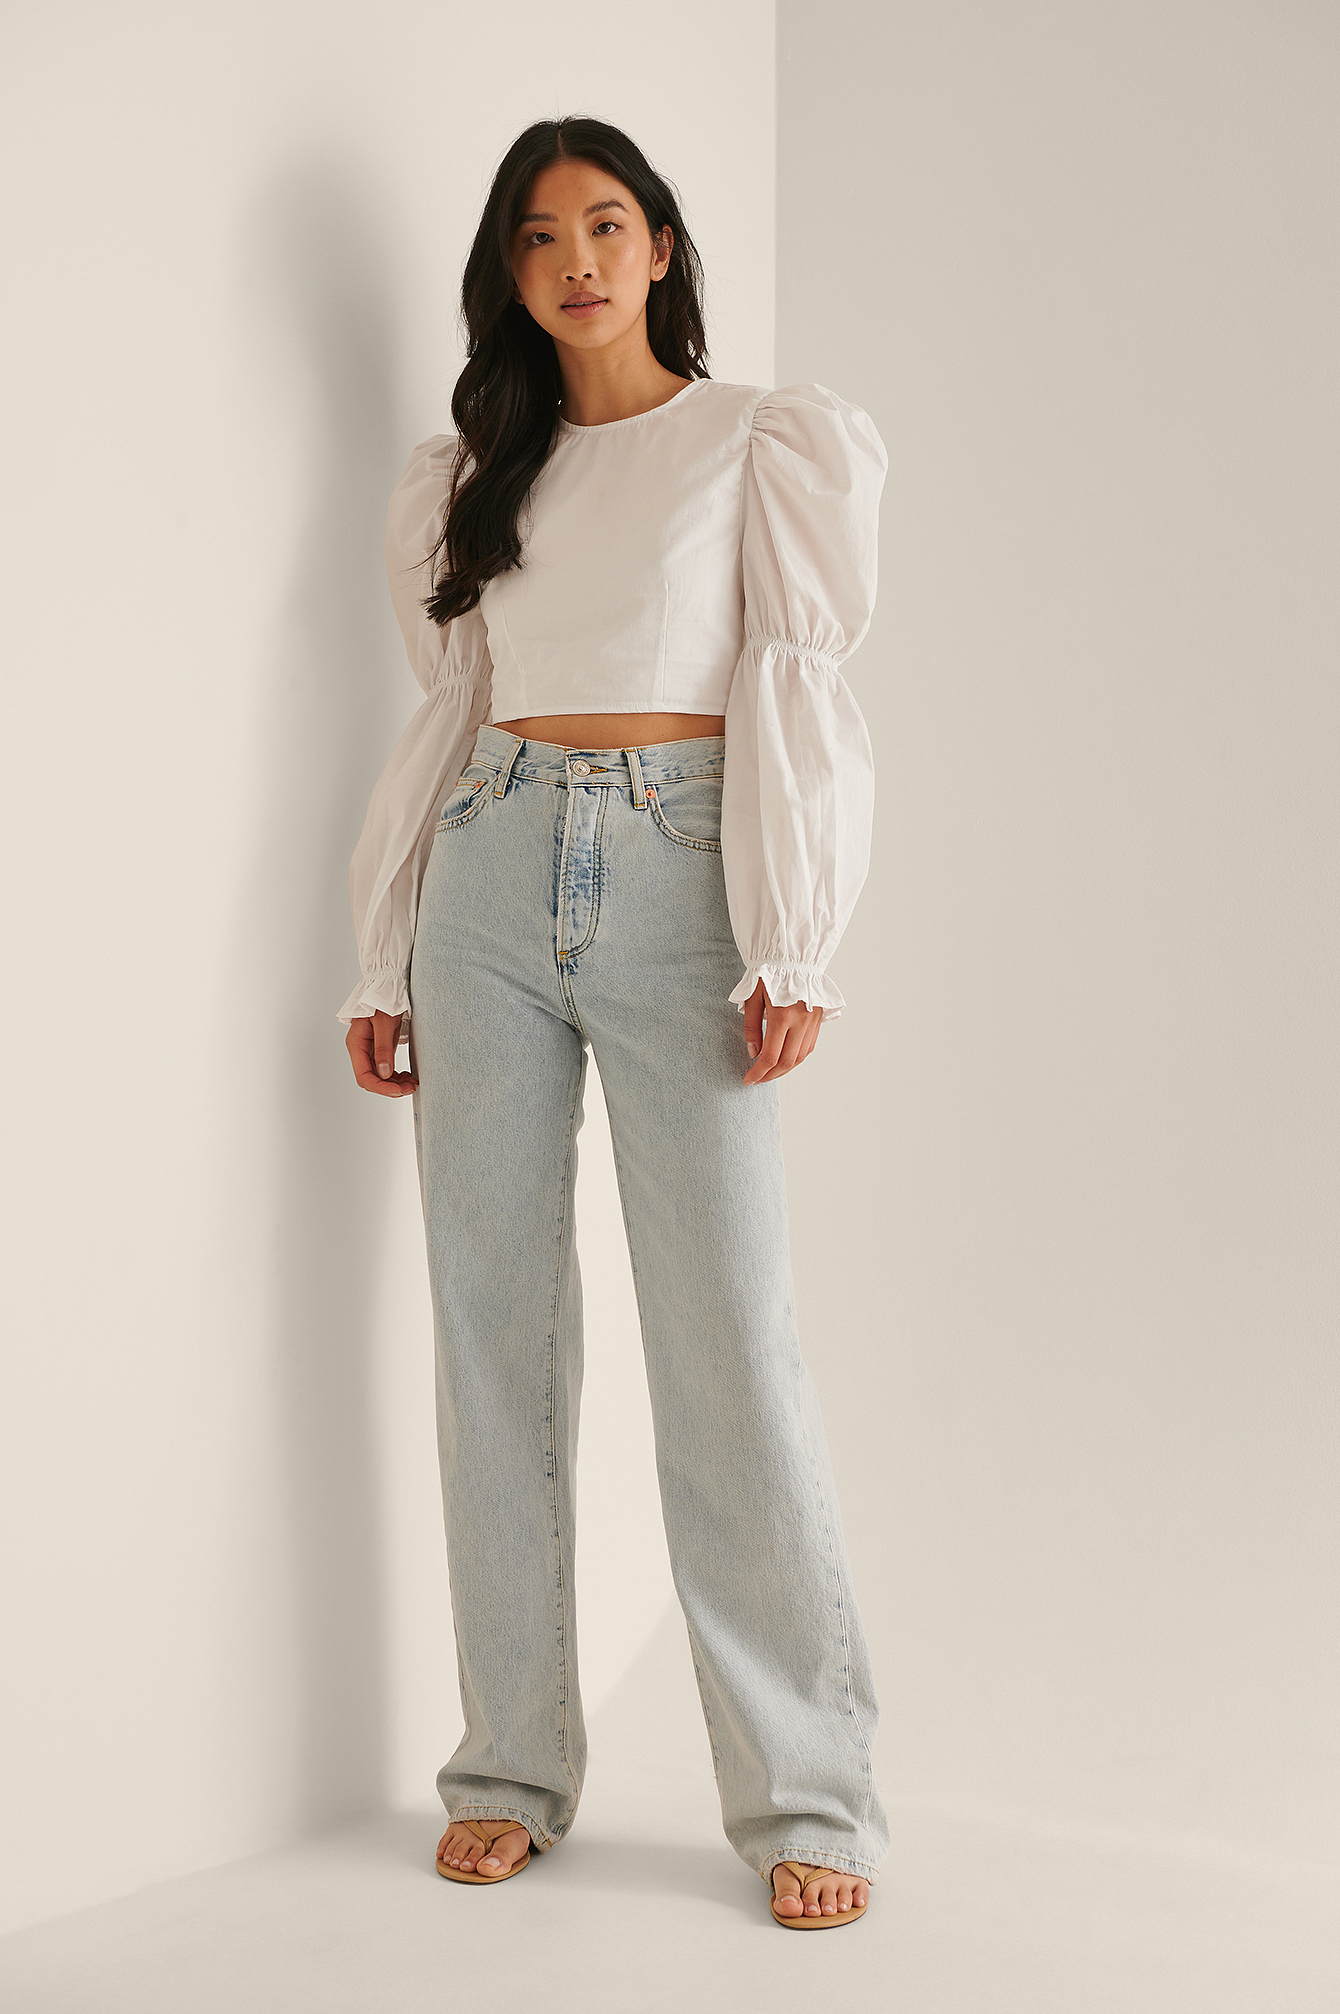 Cropped Open Back LS Blouse Outfit